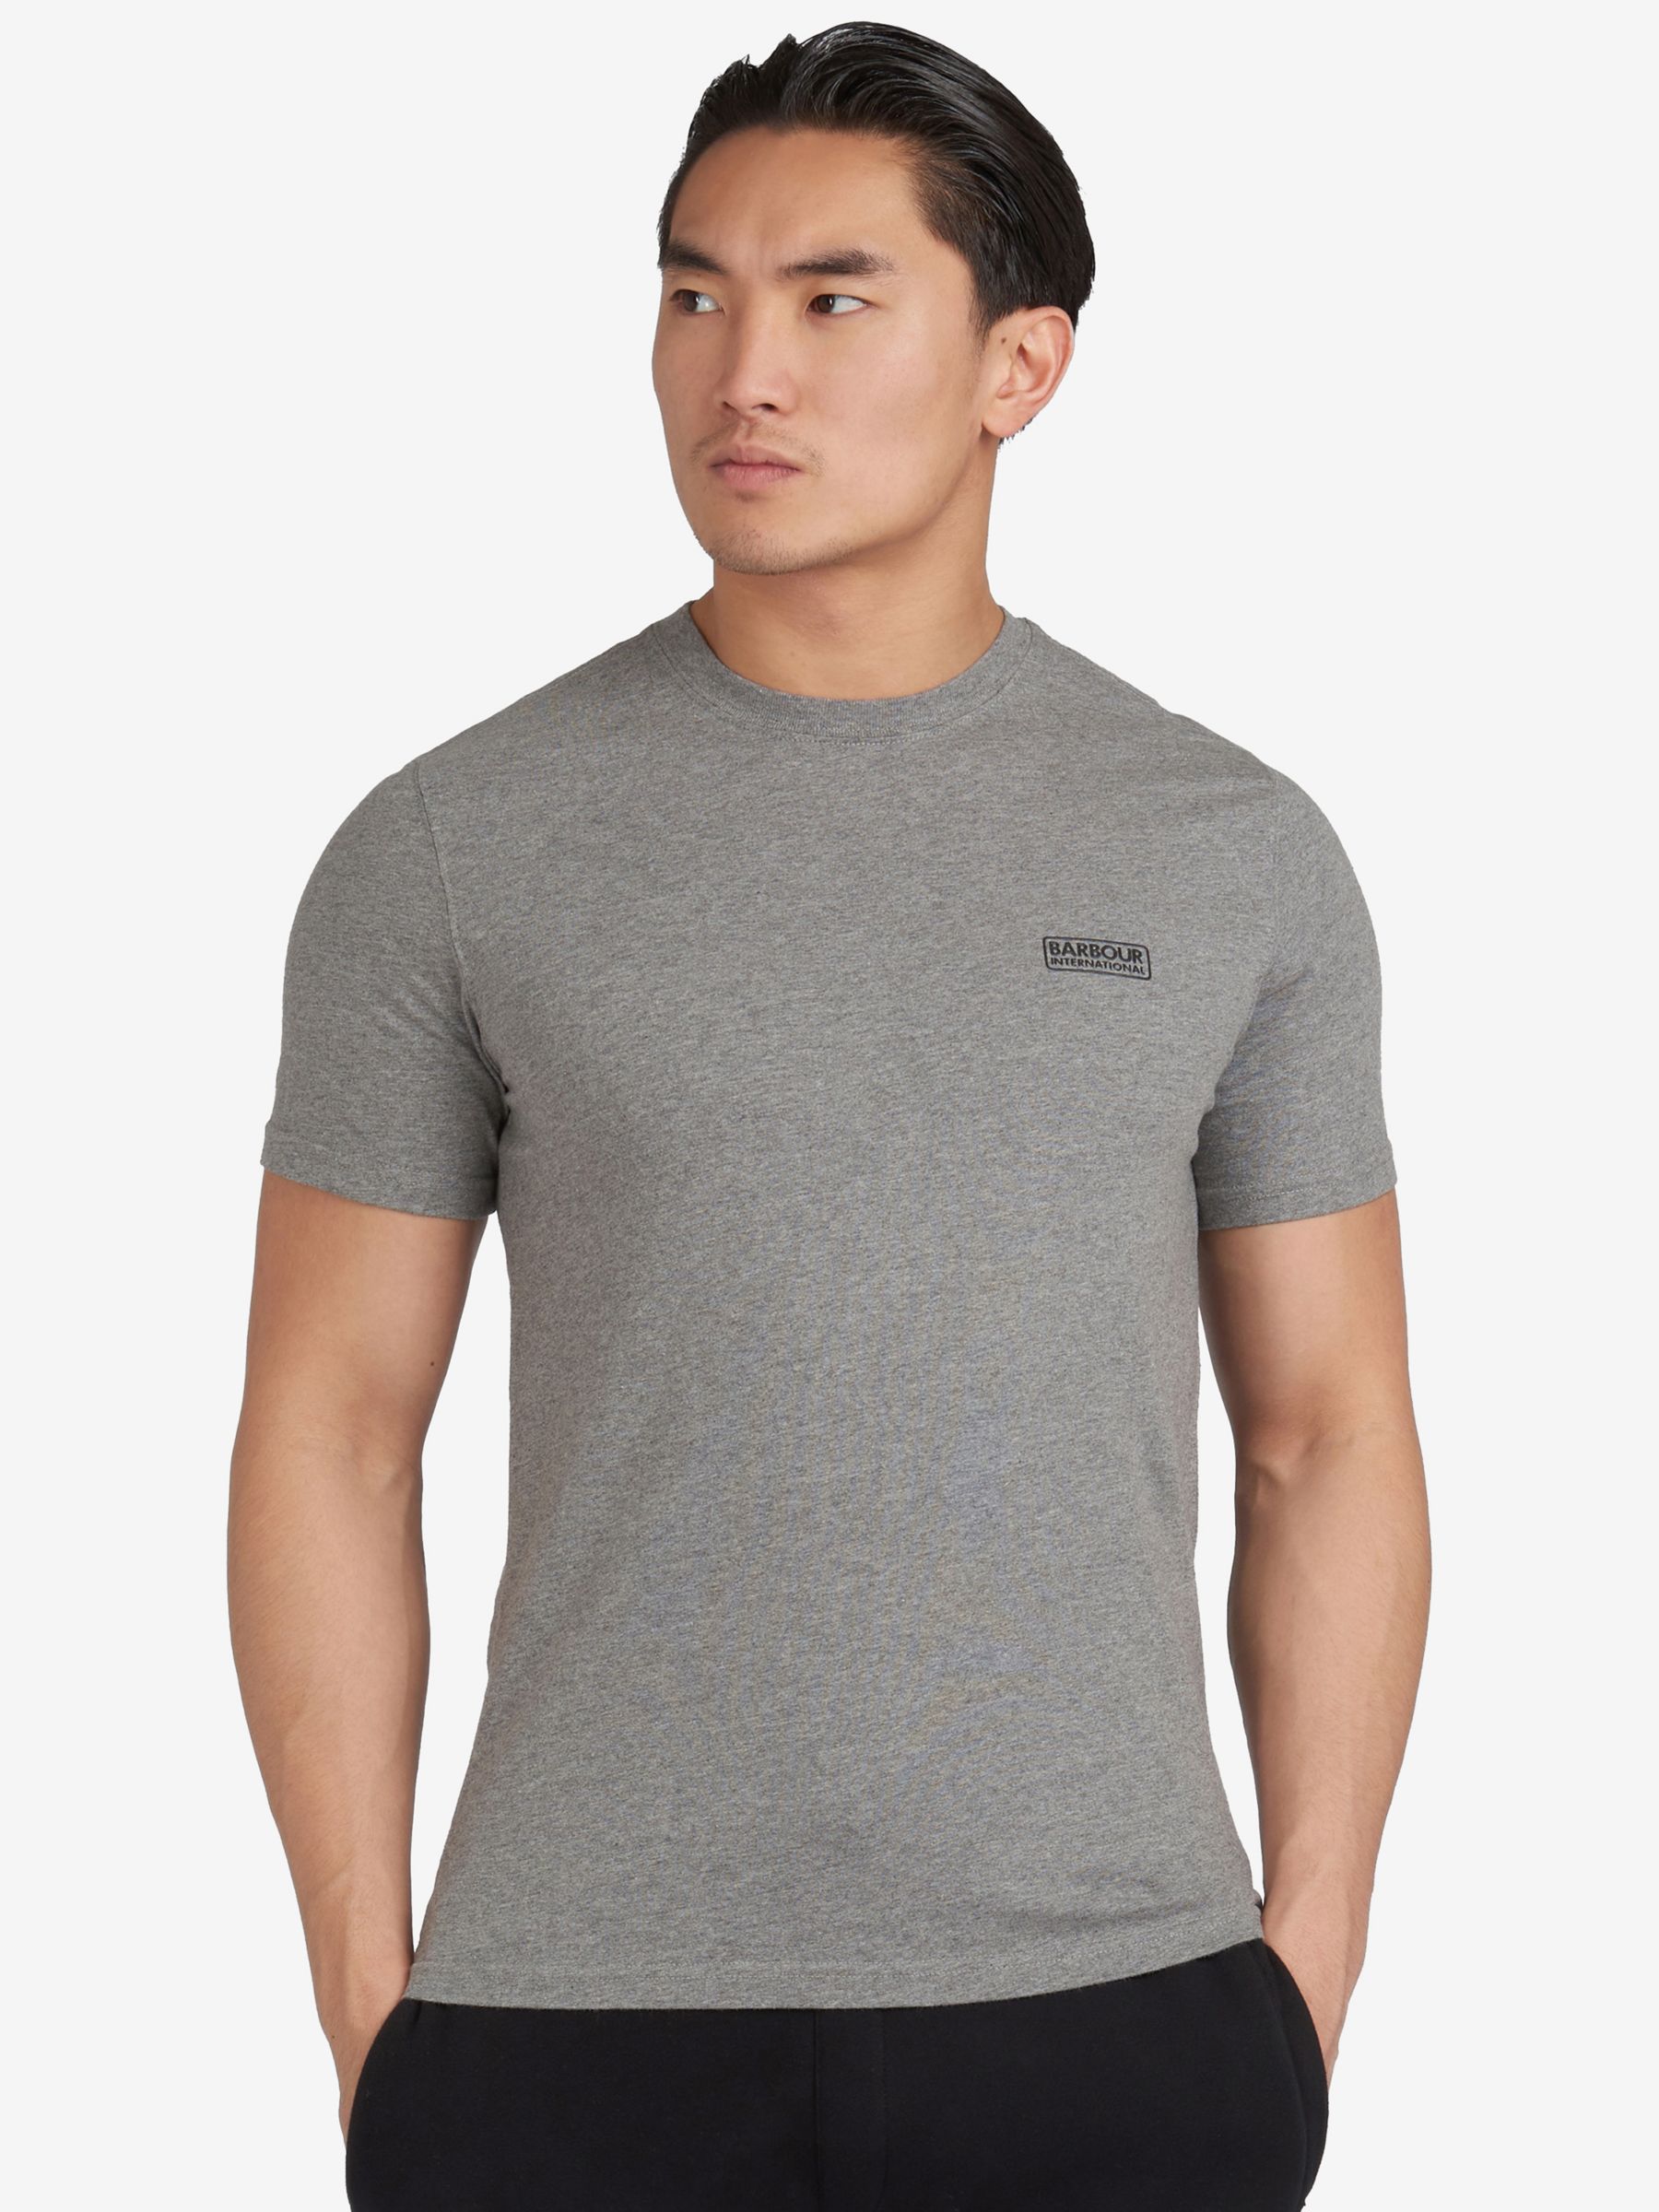 Barbour International Small Logo T-Shirt, Anthracite Marl, S